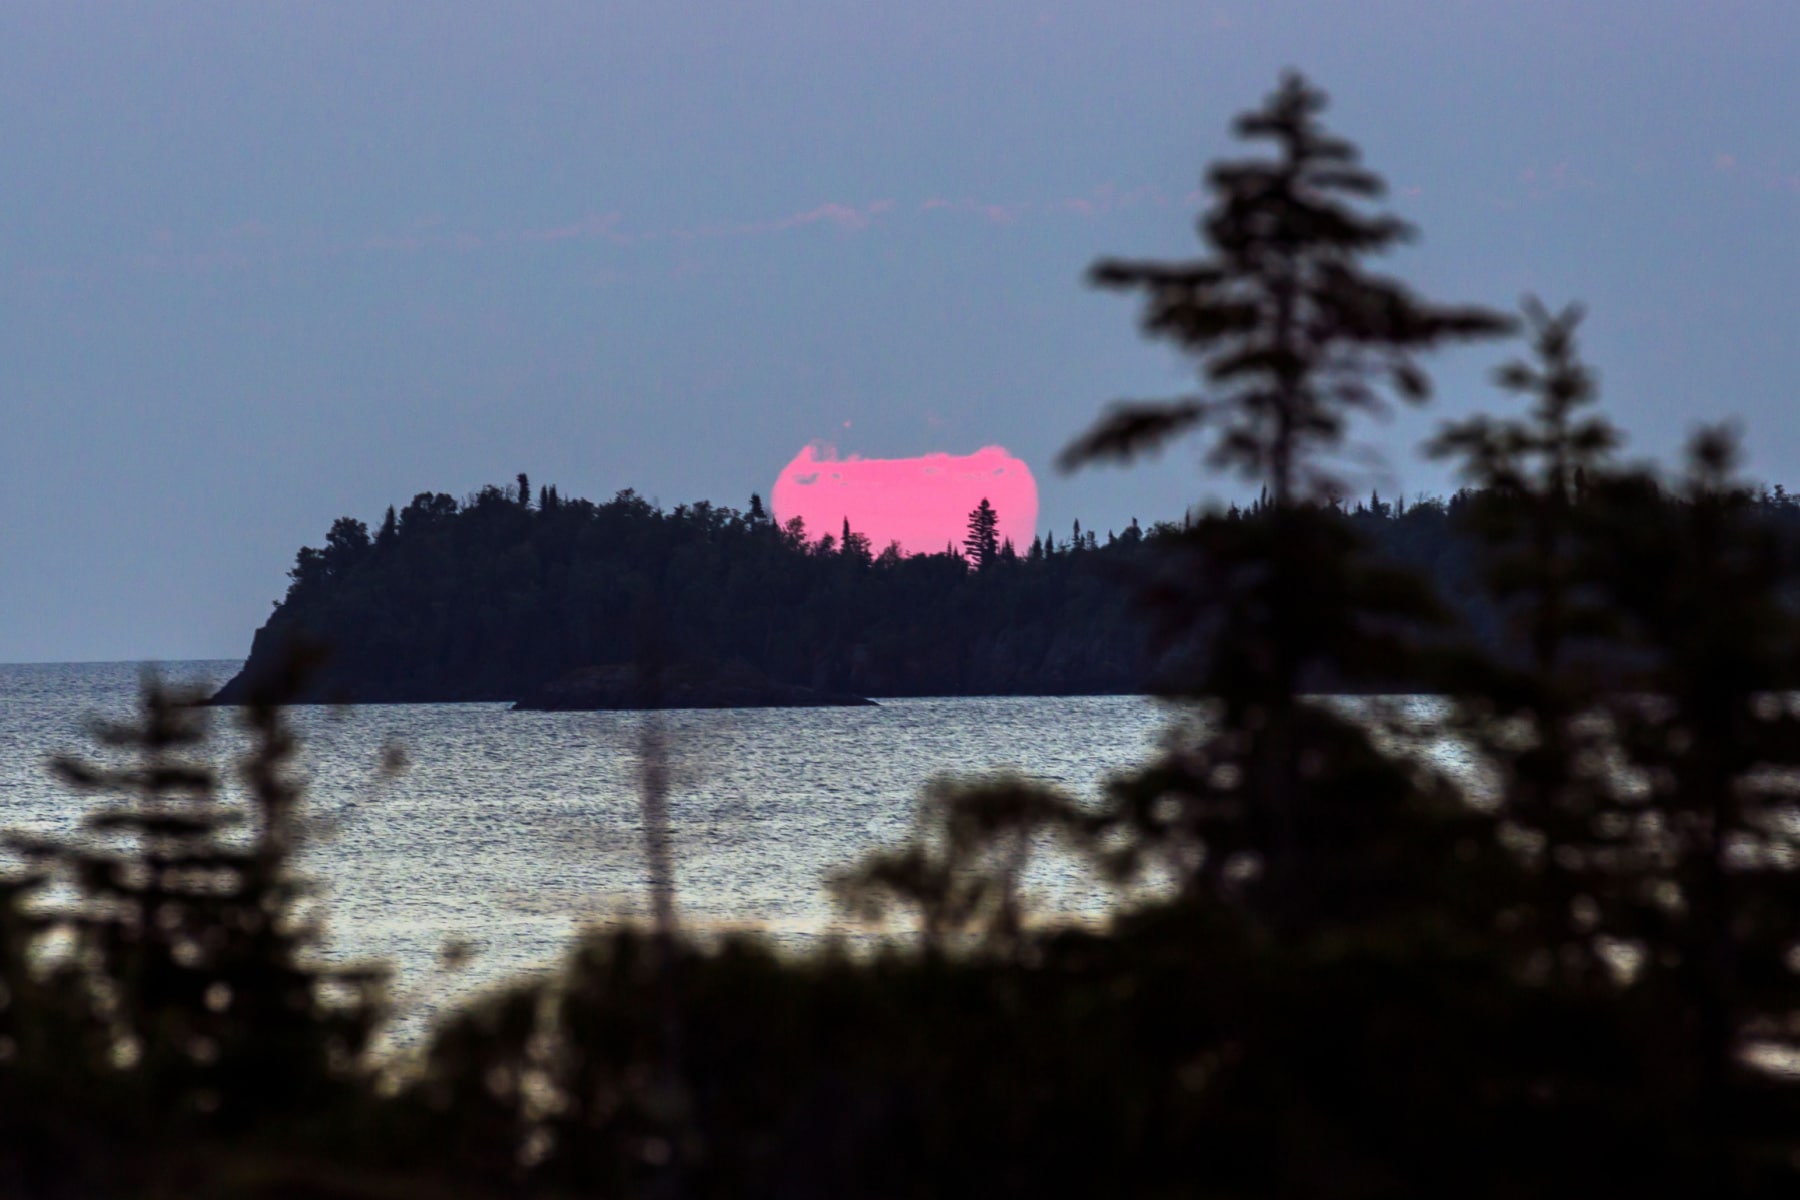 The sun sets with a pink hue on a dark blue sky behind an island in Lake Superior Michigan.